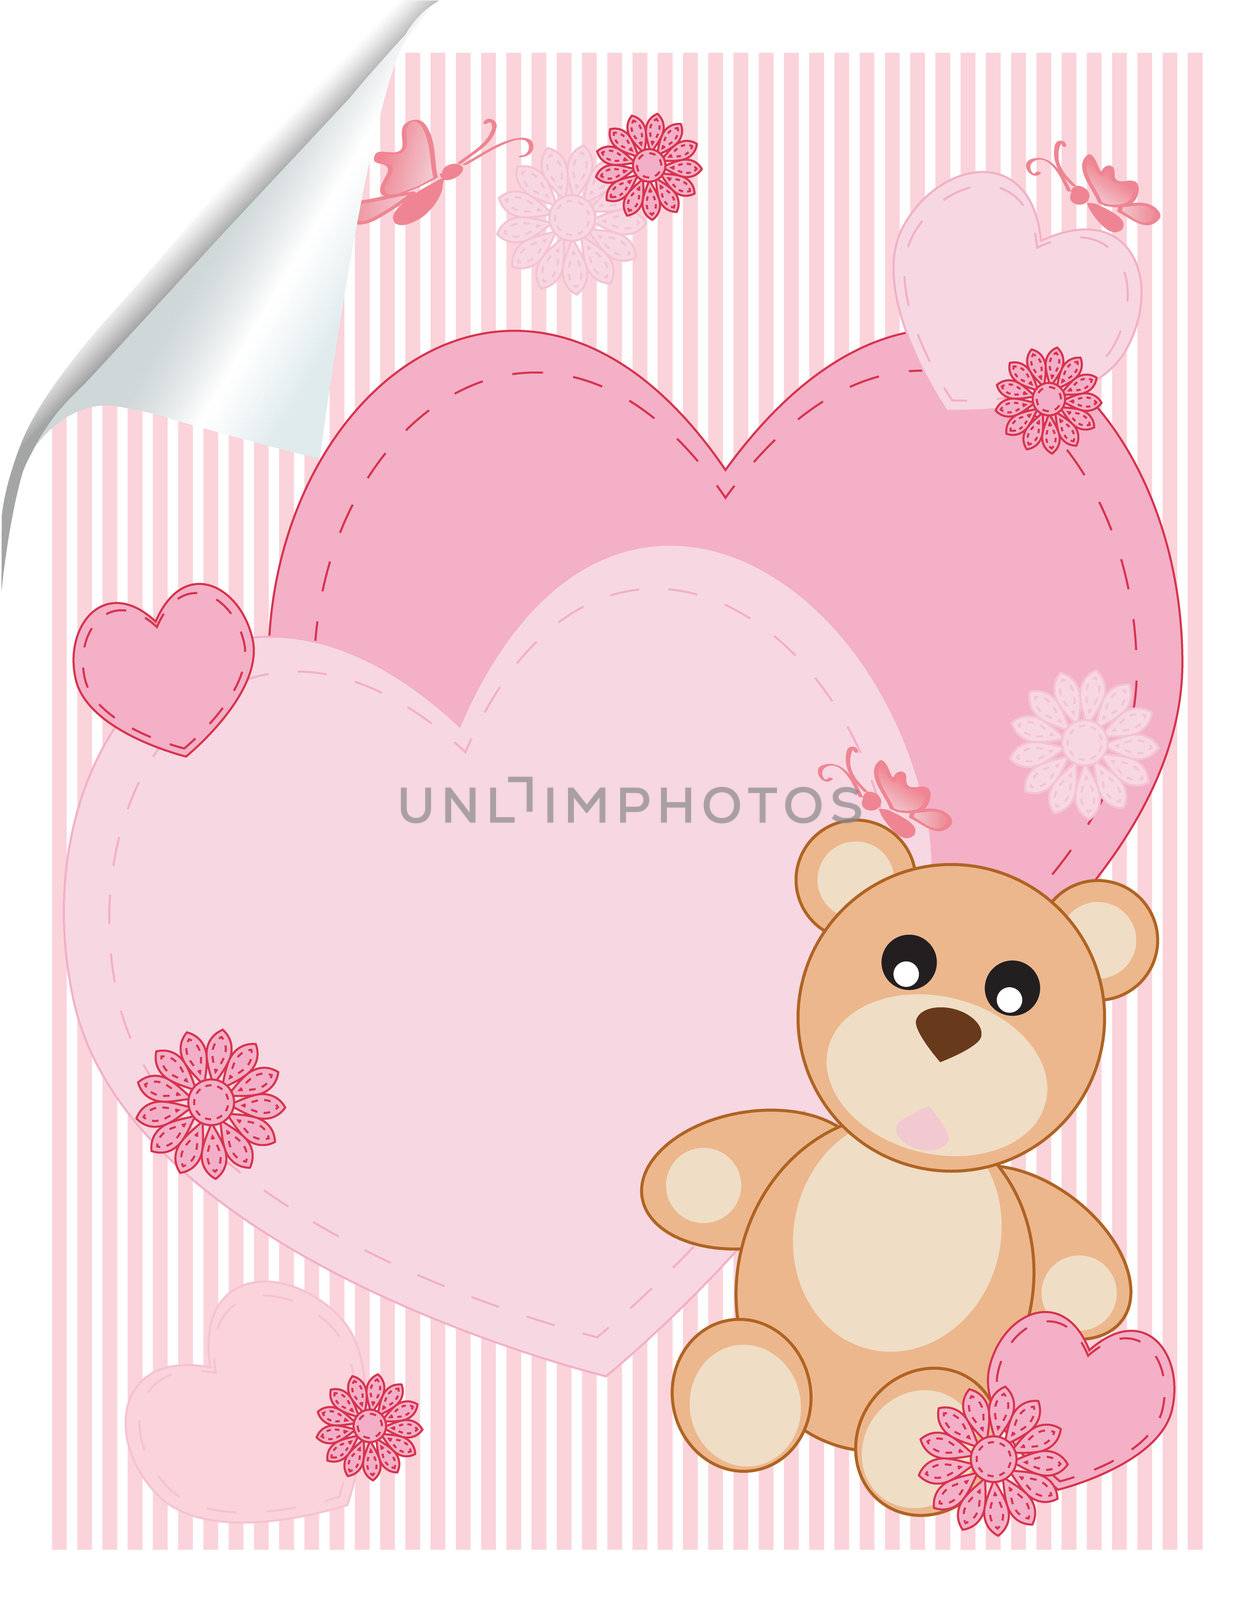 abstract background with hearts and bear by rodakm